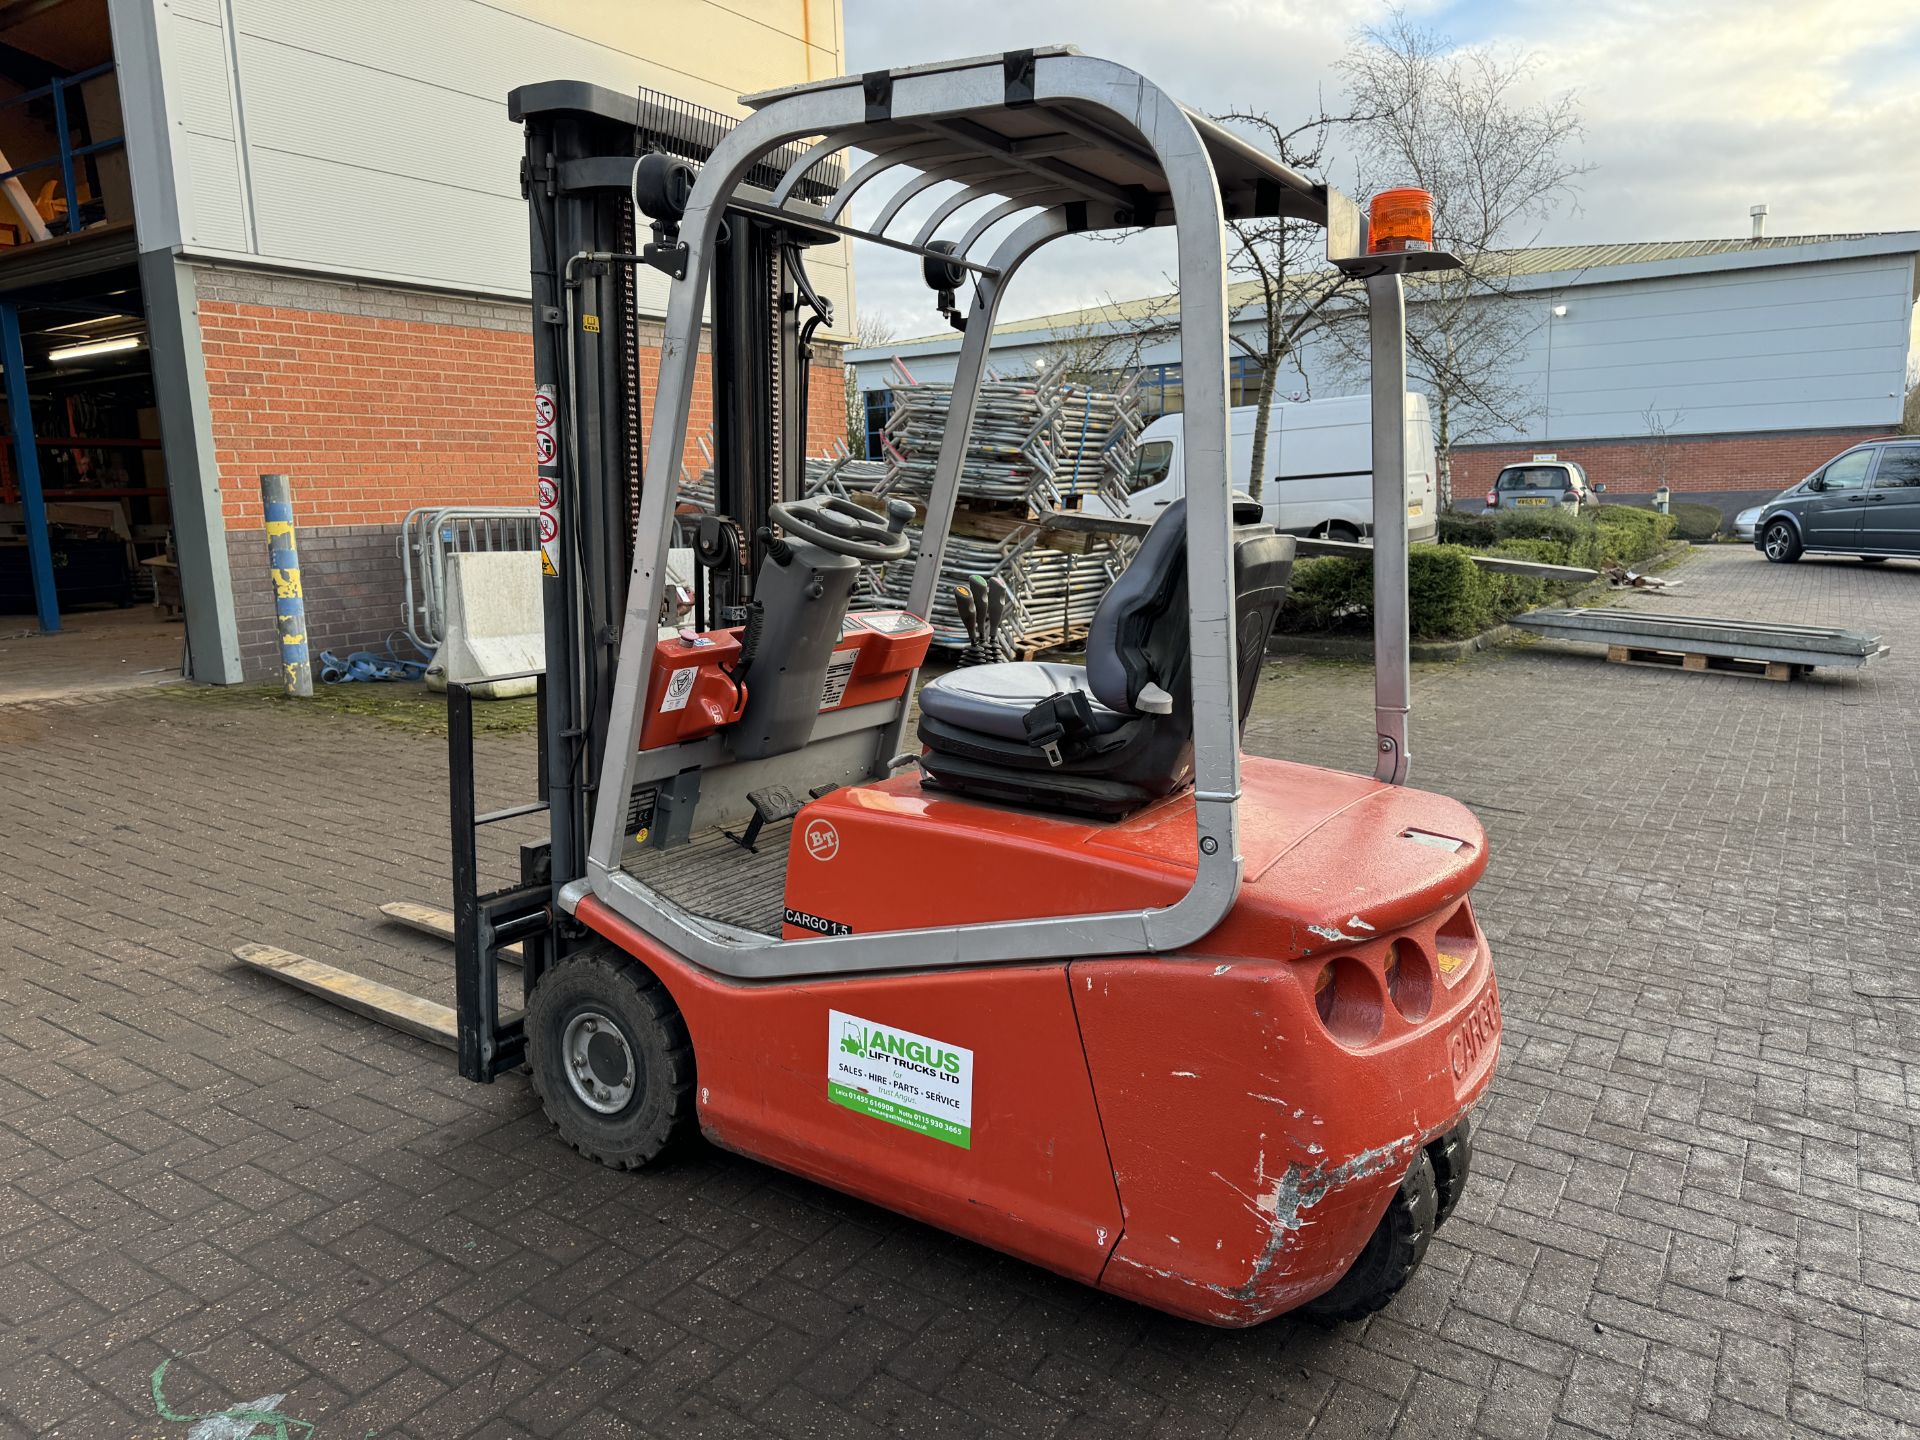 Cargo Model C 3 E 150 Tri Wheel Container Specification Electric Reach Truck - Image 3 of 28